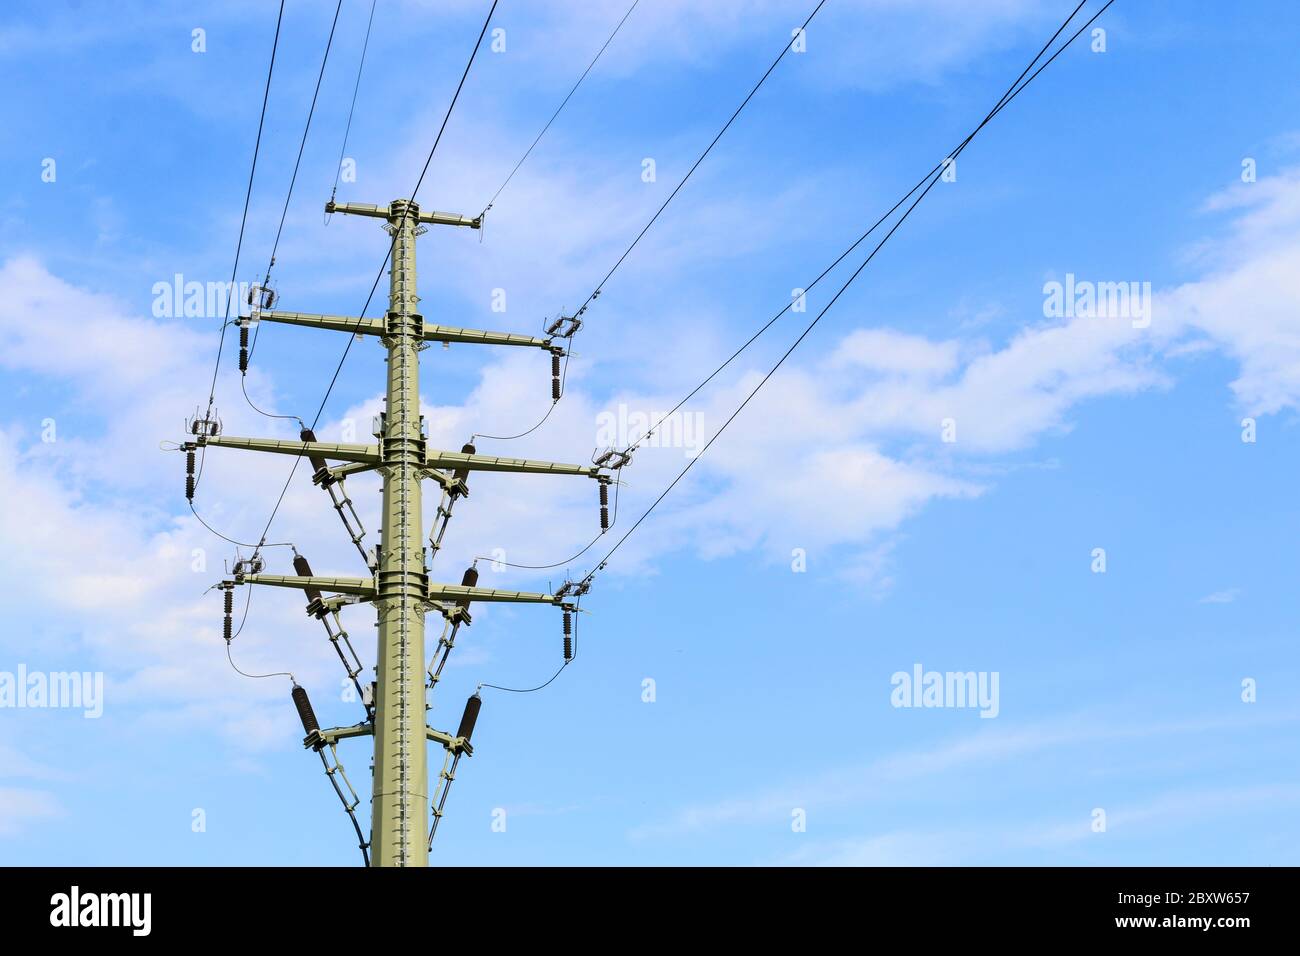 Power pole with electric wires. Industry tools Stock Photo